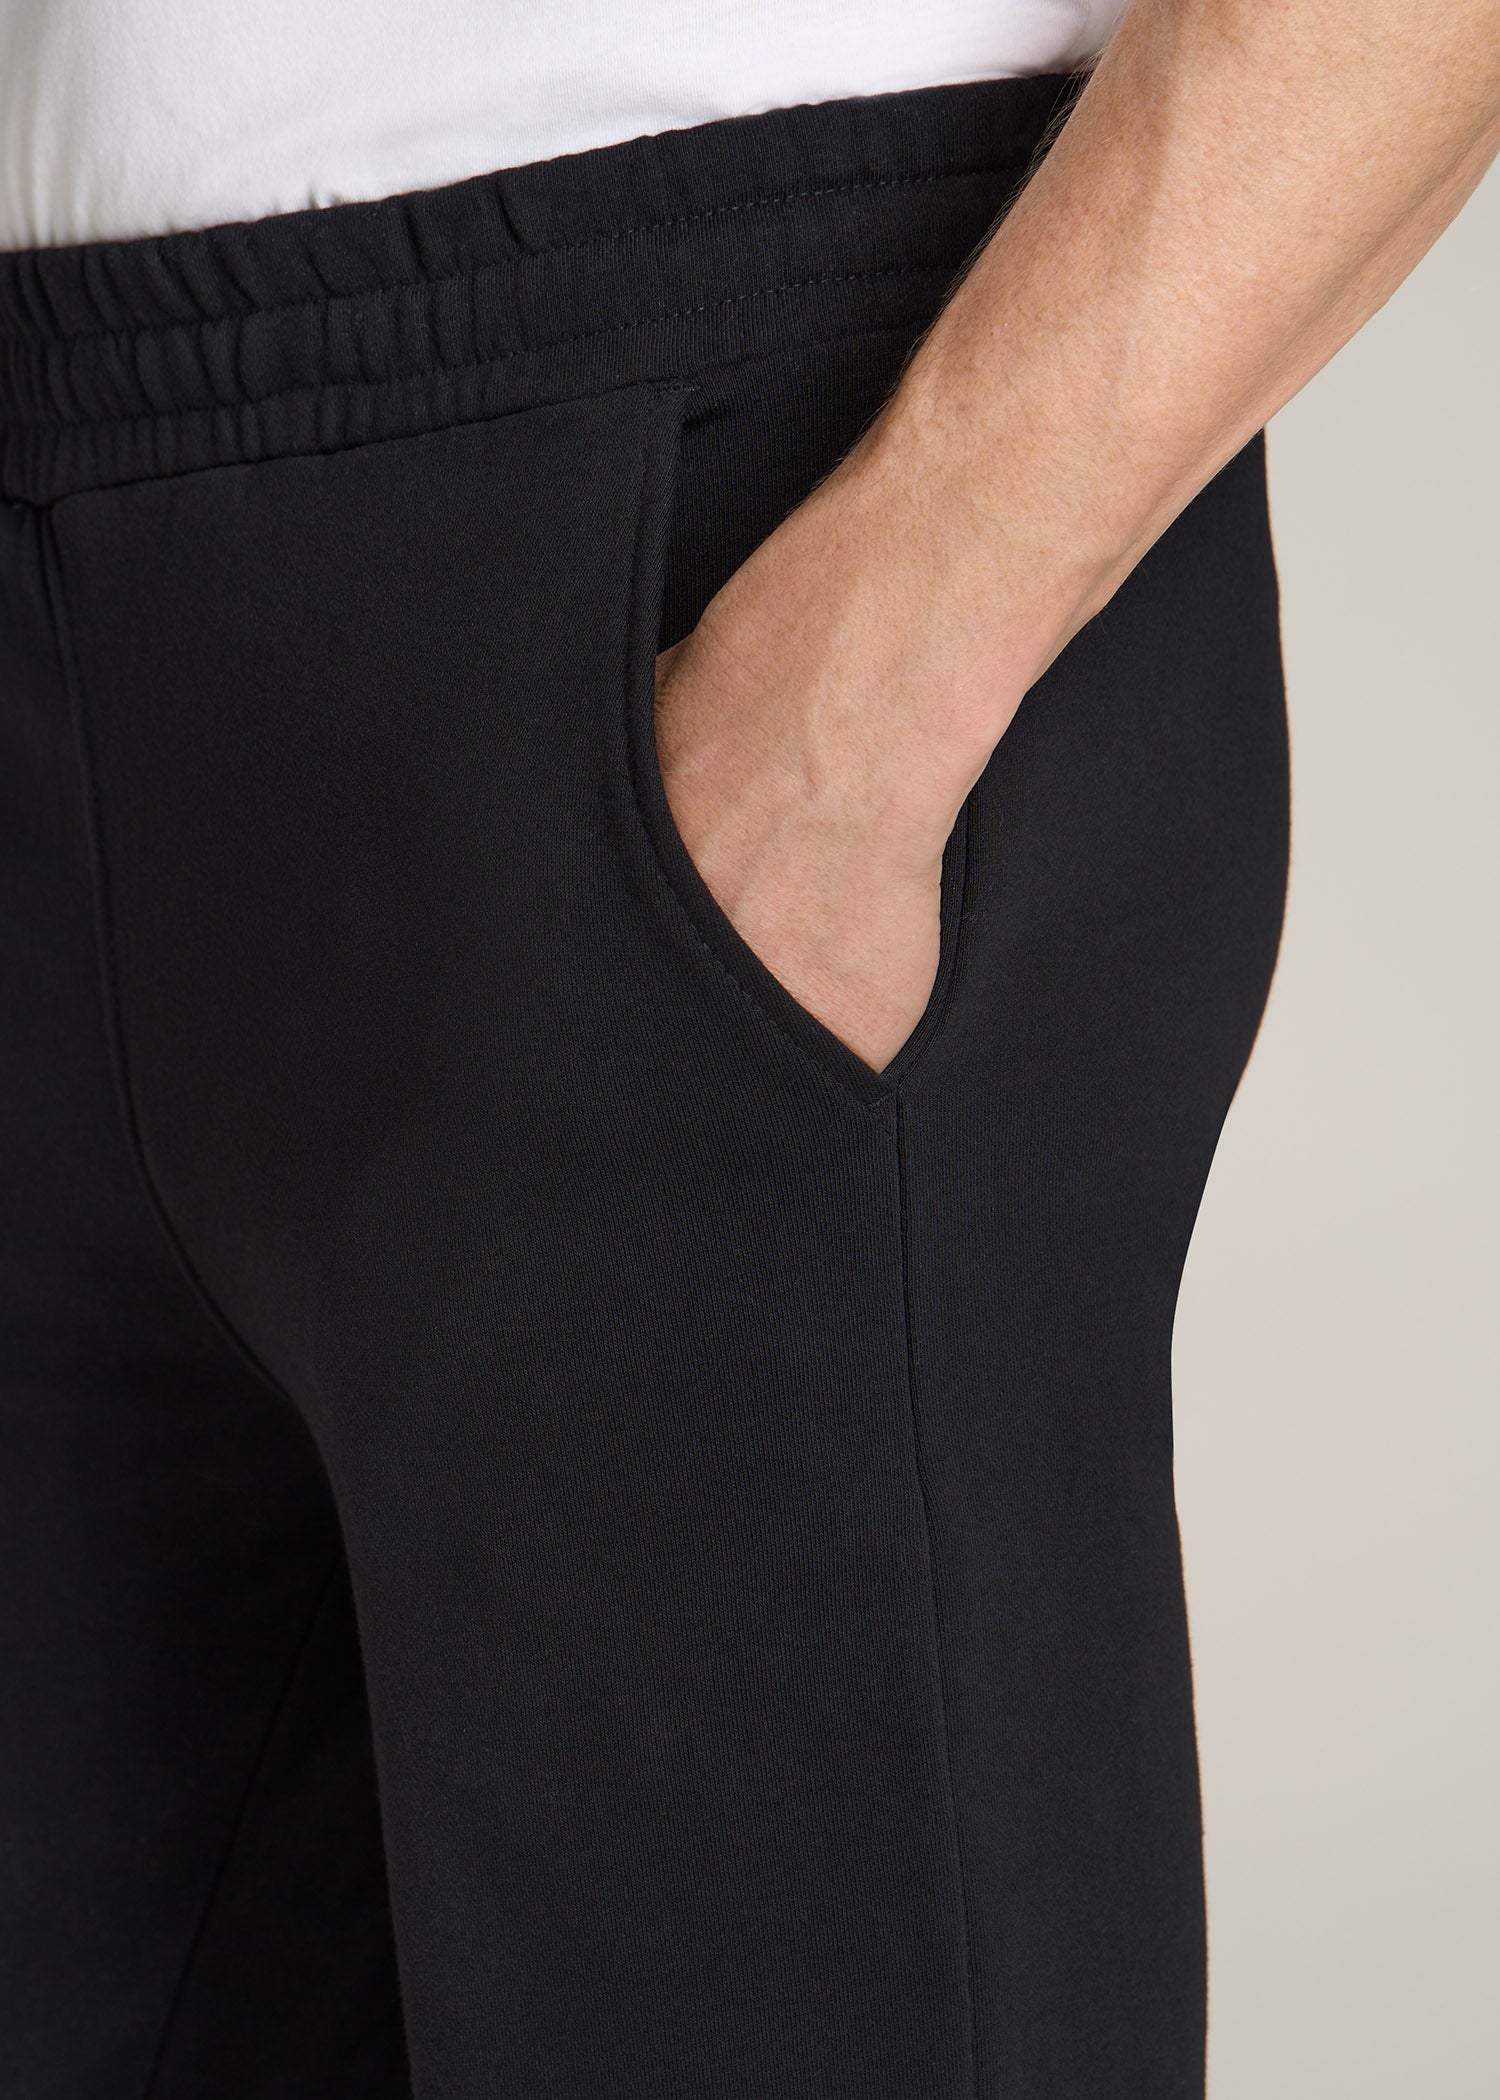 Wearever French Terry Sweatpants for Tall Men in Black